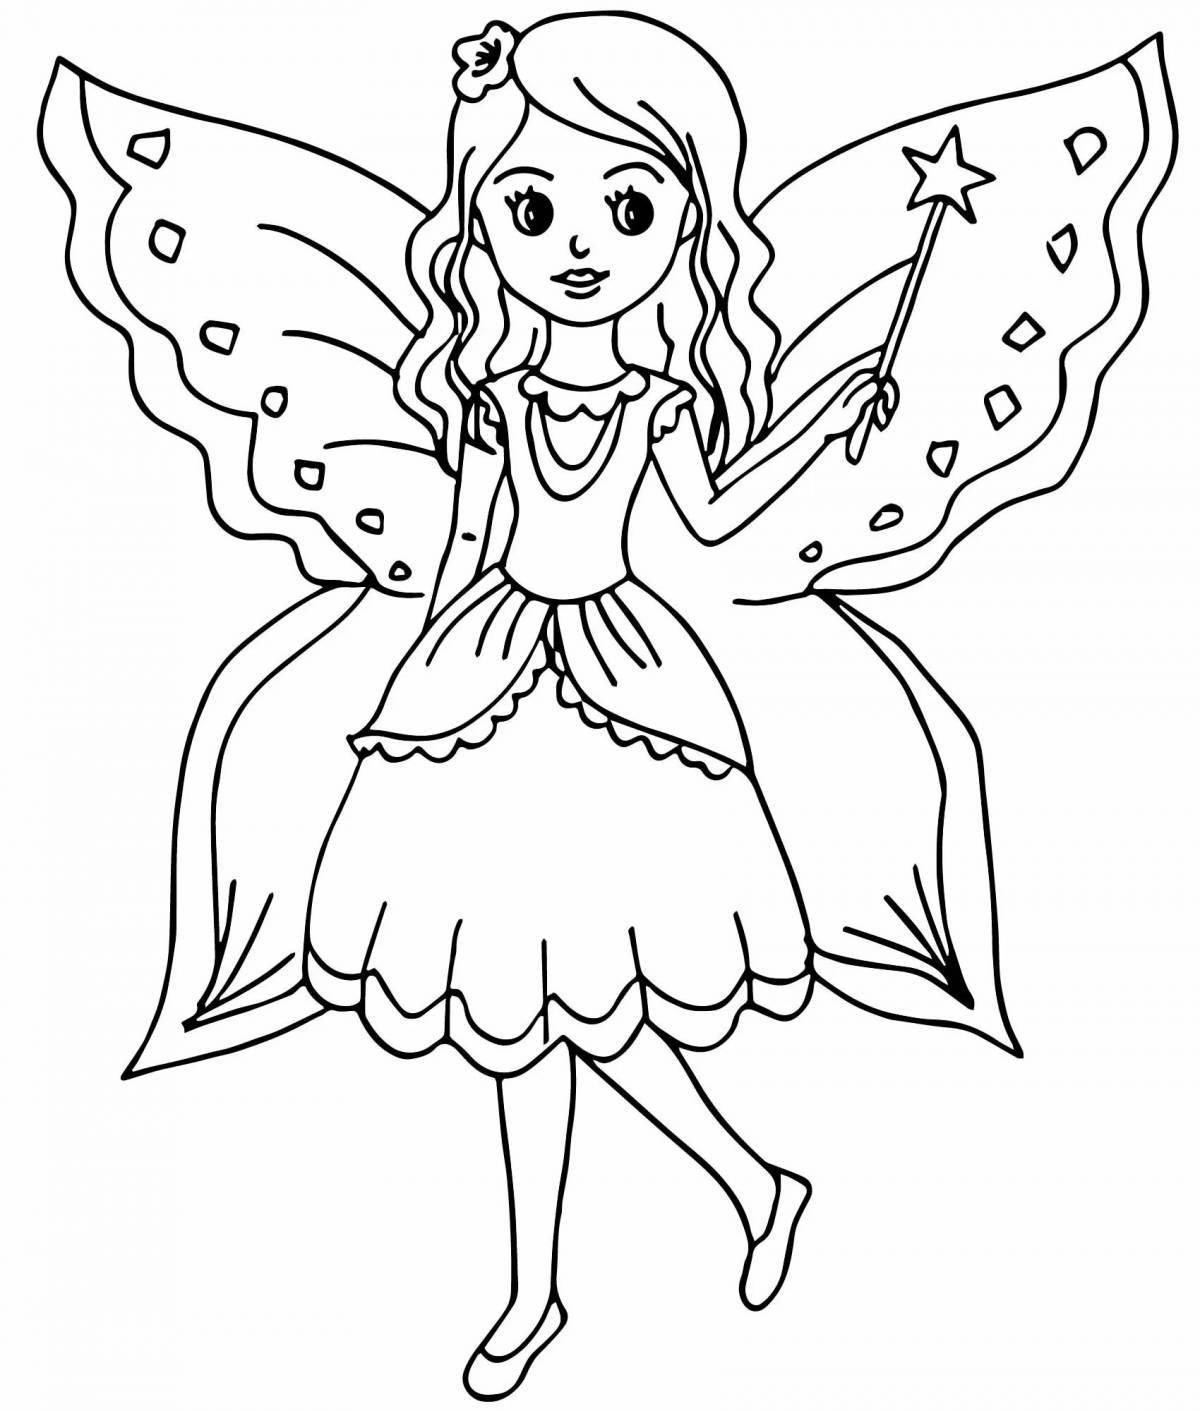 Exciting fairy coloring book